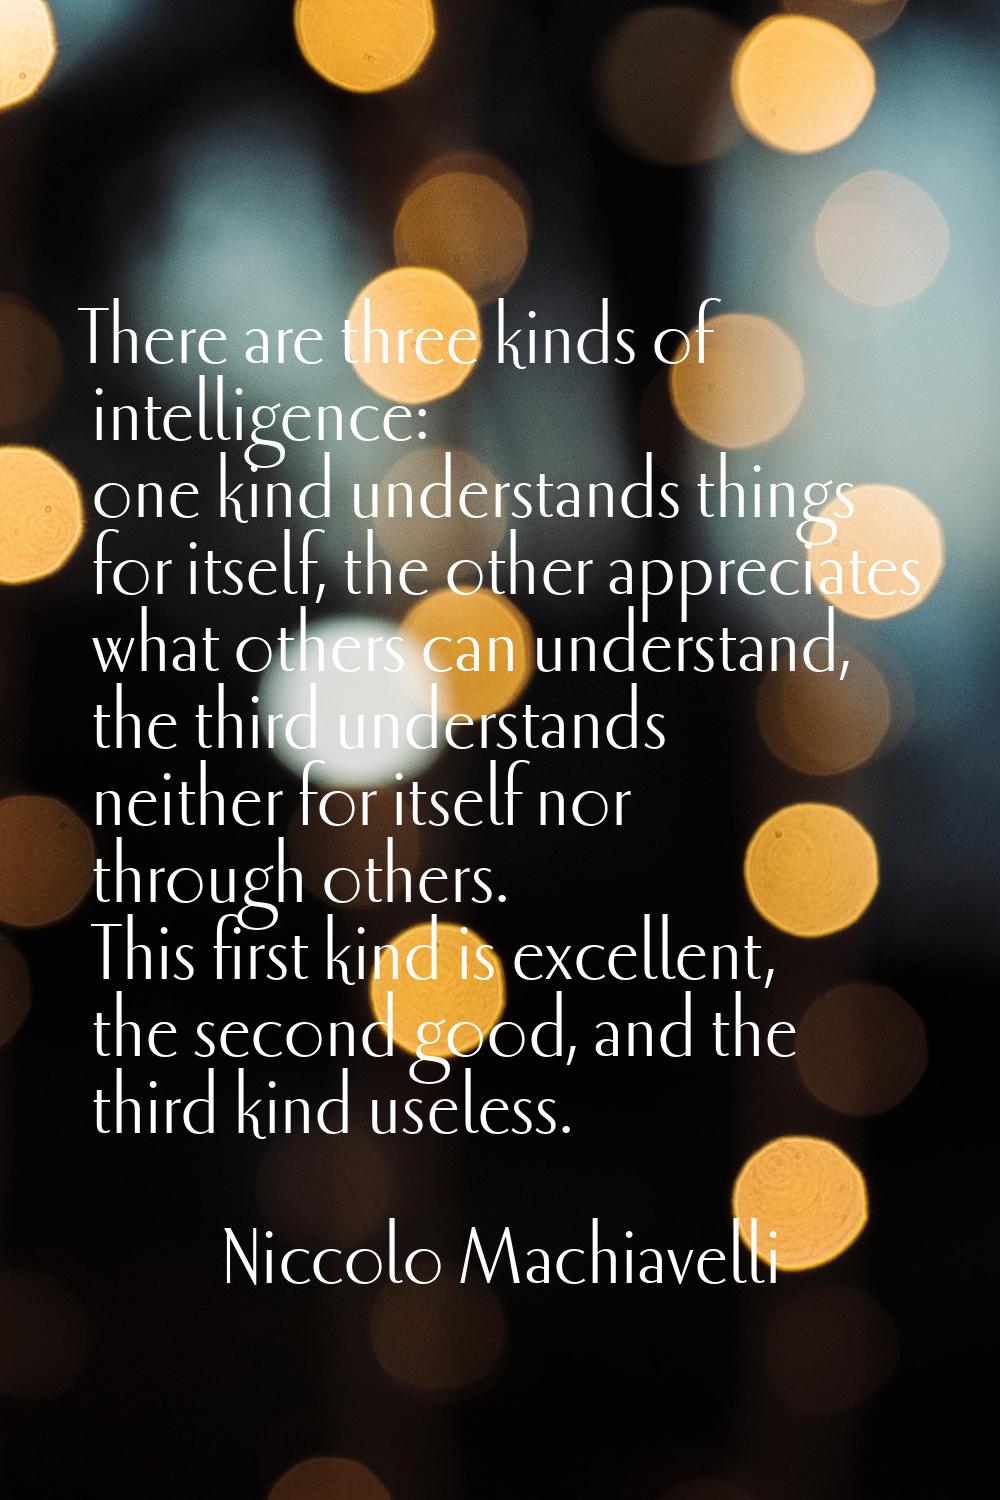 There are three kinds of intelligence: one kind understands things for itself, the other appreciate